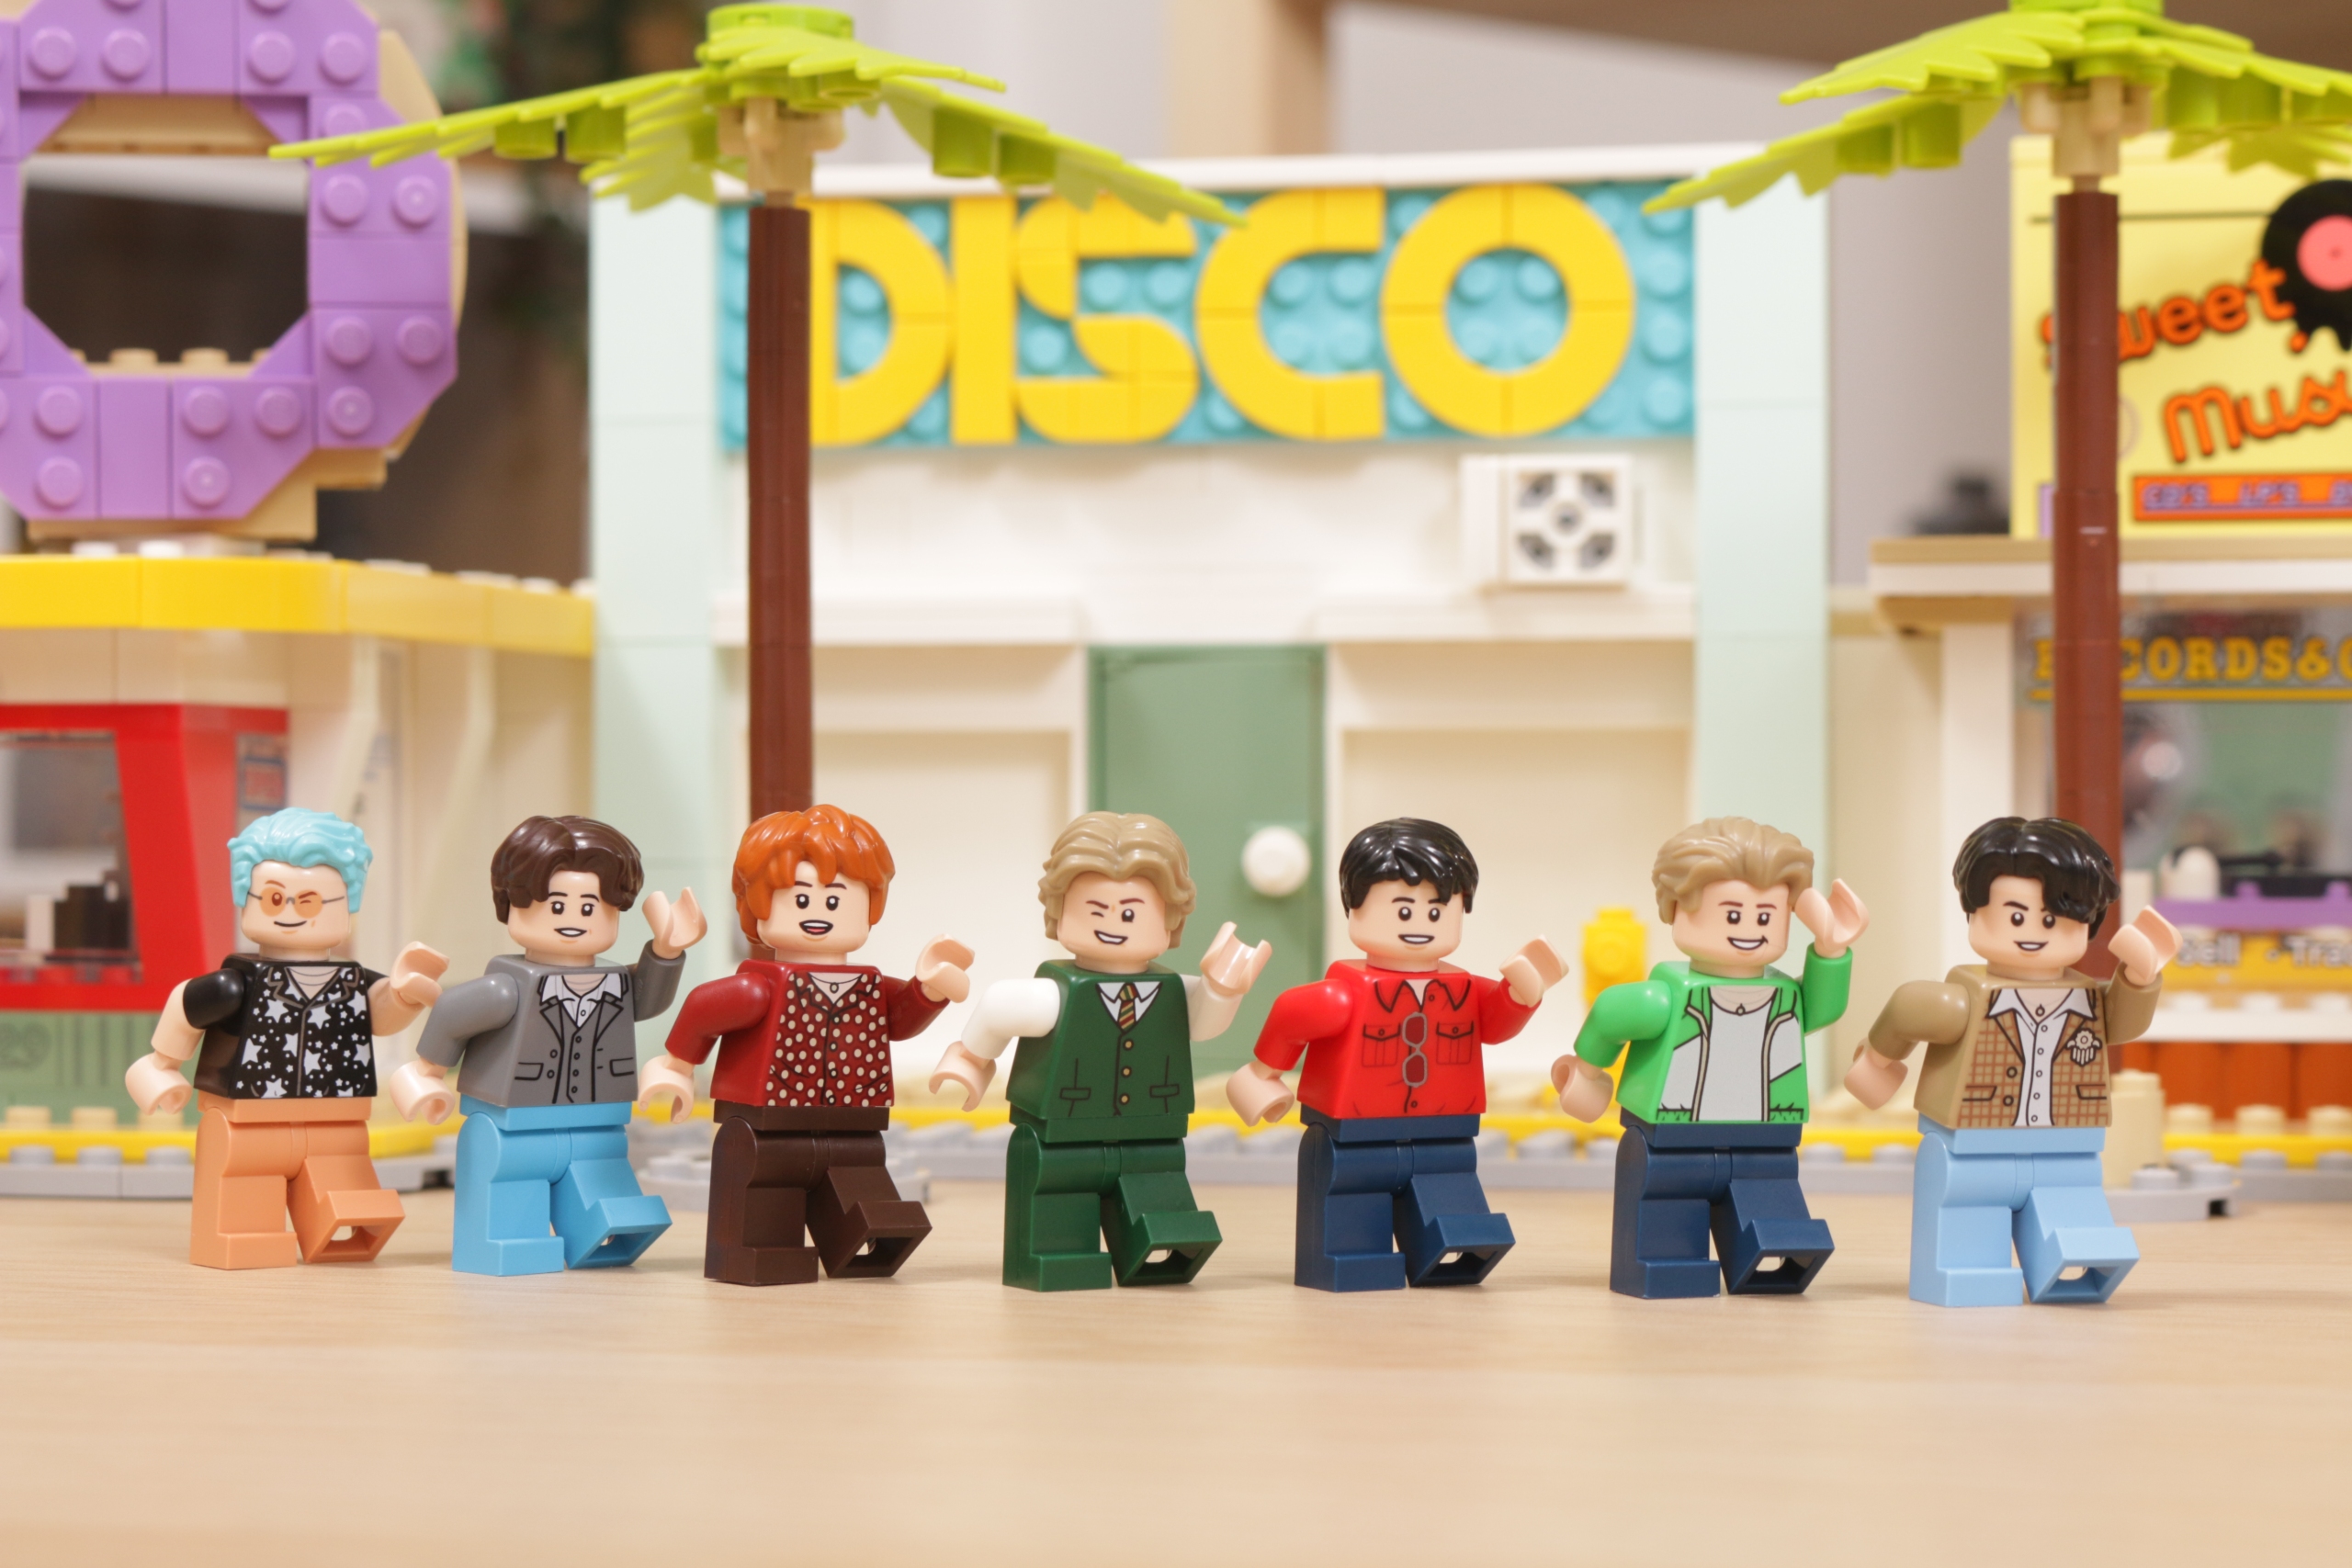 LEGO Ideas BTS Dynamite 21339 Model Kit for Adults, Gift Idea for BTS Fun  with 7 Minifigures of the Famous K-pop Band, Features RM, Jin, SUGA,  j-hope